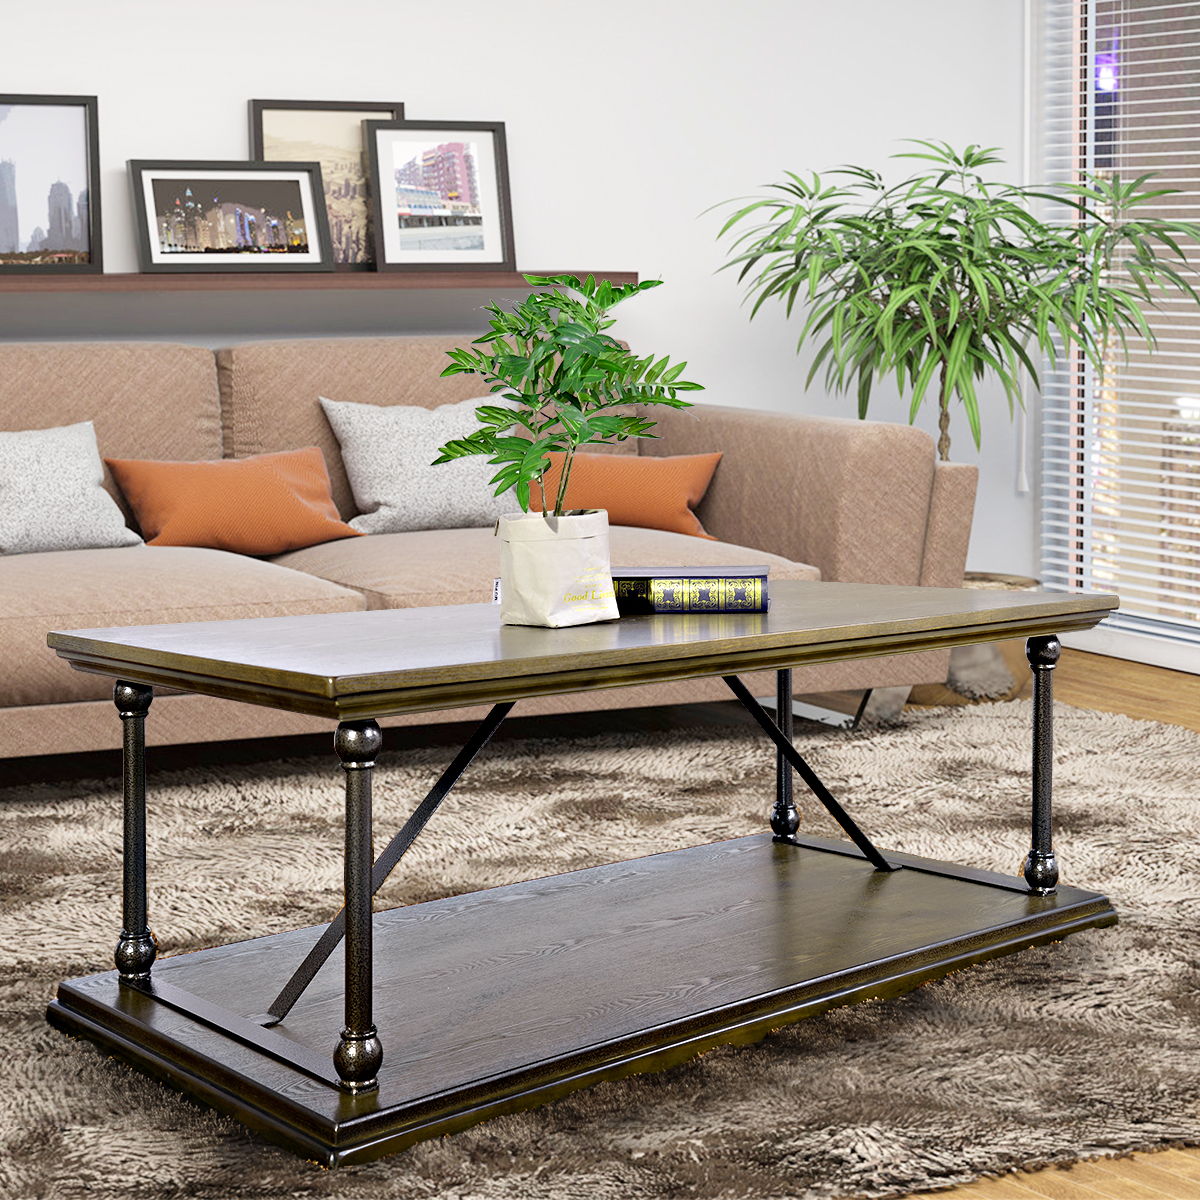 47.2" W X 23.6" D X 16.9" H Country Style Coffee Table With Bottom Shelf - Brown & Black